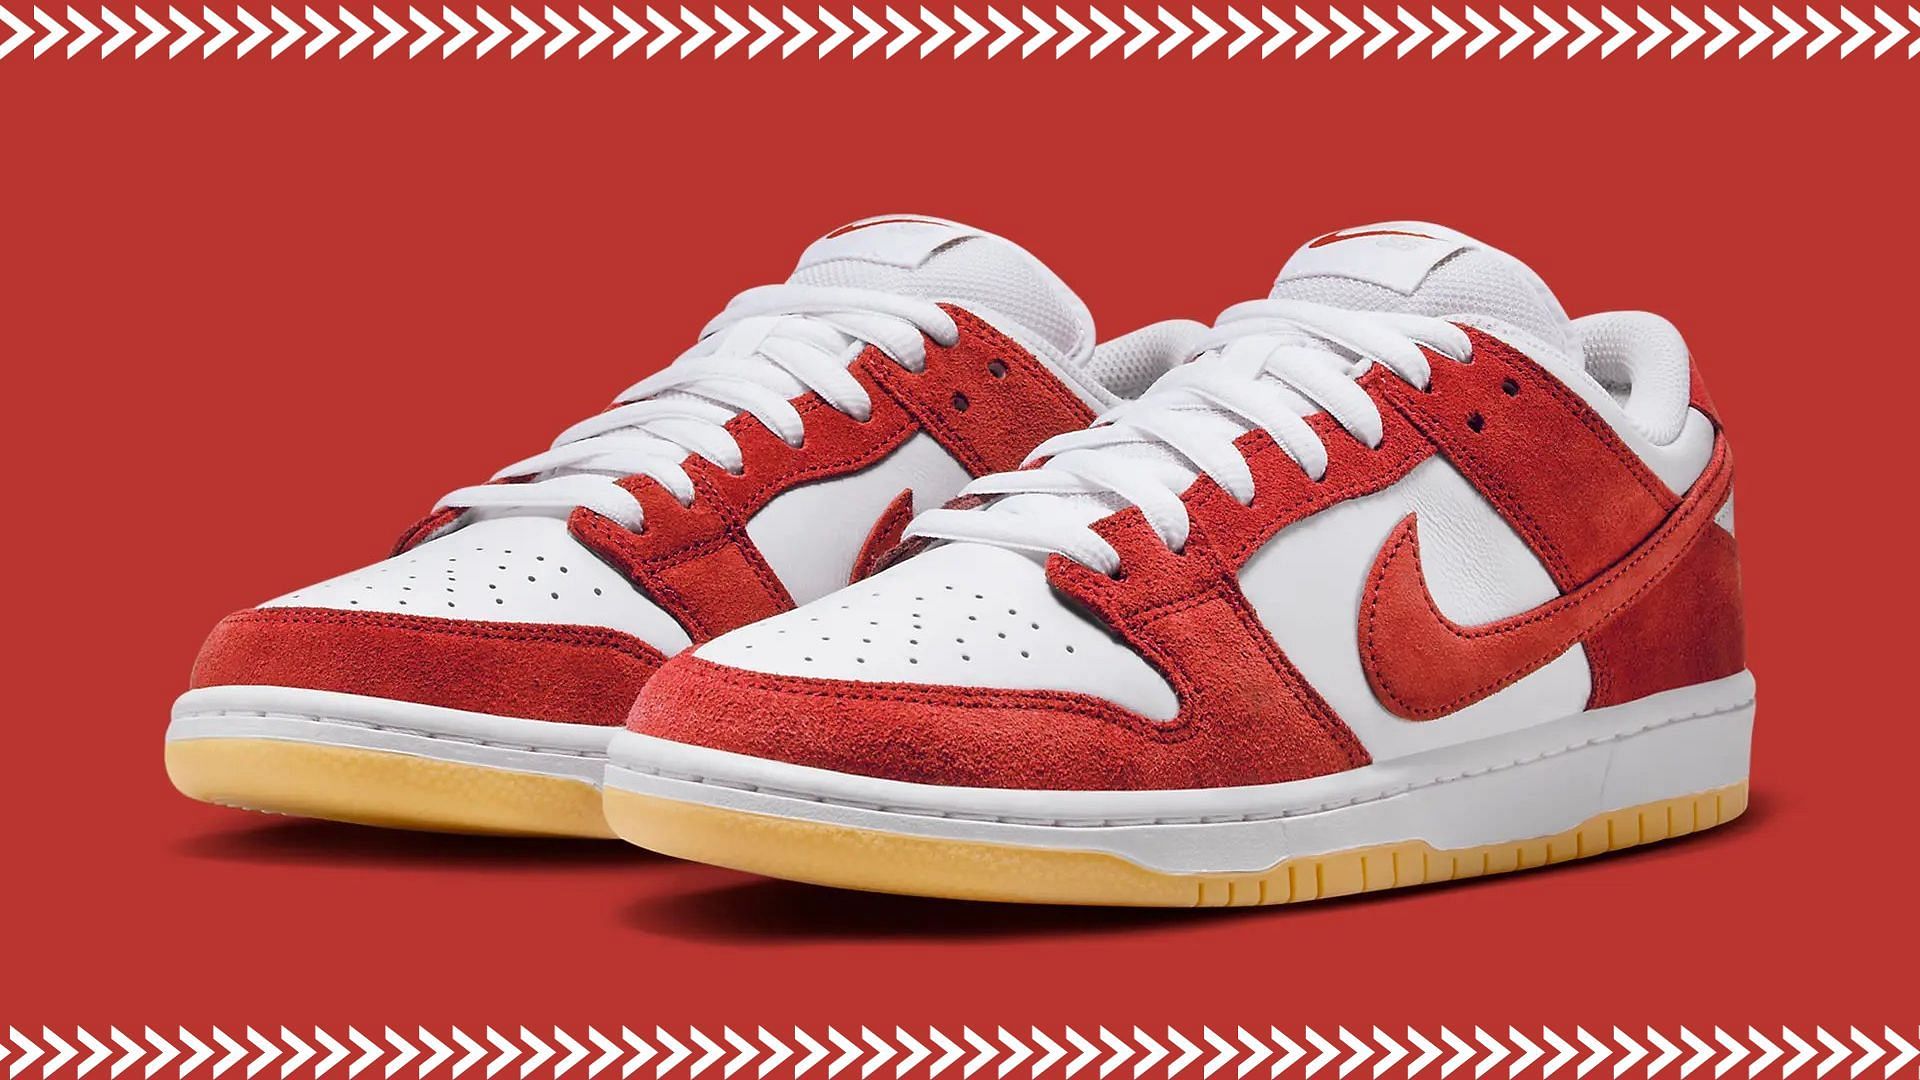 University Red: Nike SB Dunk Low “University Red Gum” shoes: Where